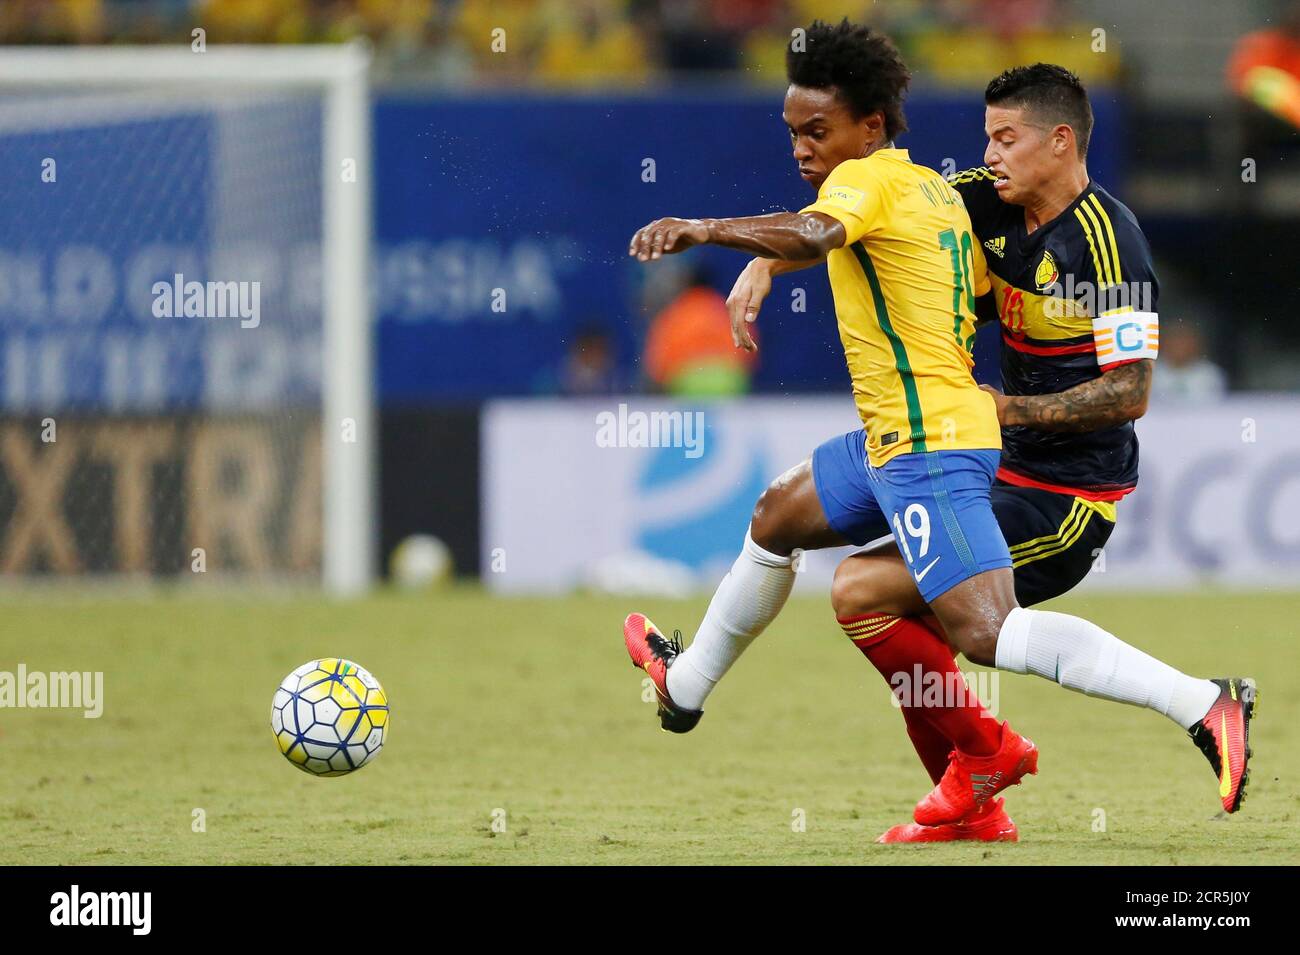 Football Soccer - World Cup 2018 Qualifiers - Brazil v Colombia - Amazonia Arena Stadium, Manaus, Brazil - 6/9/16. Willian (L) of Brazil in action with James Rodriguez of Colombia.   REUTERS/Bruno Kelly Stock Photo